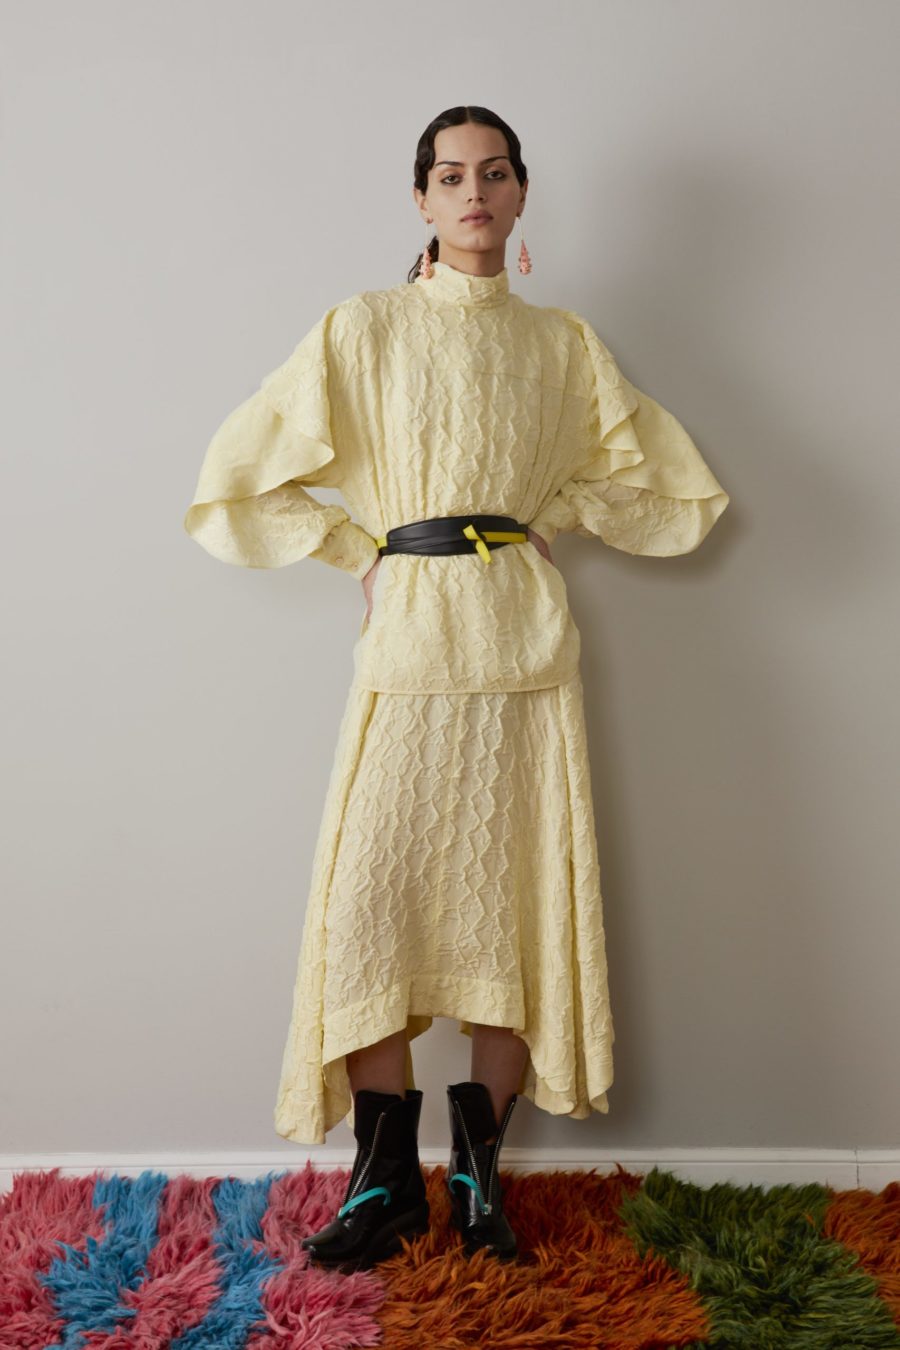 AW22 Colville. Lemon knitted jumper and knit skirt. The fashion stalwarts, Lucinda Chambers and Molly Molloy of Colville, on crafting thoughtful, eclectic pieces designed to make an impact.